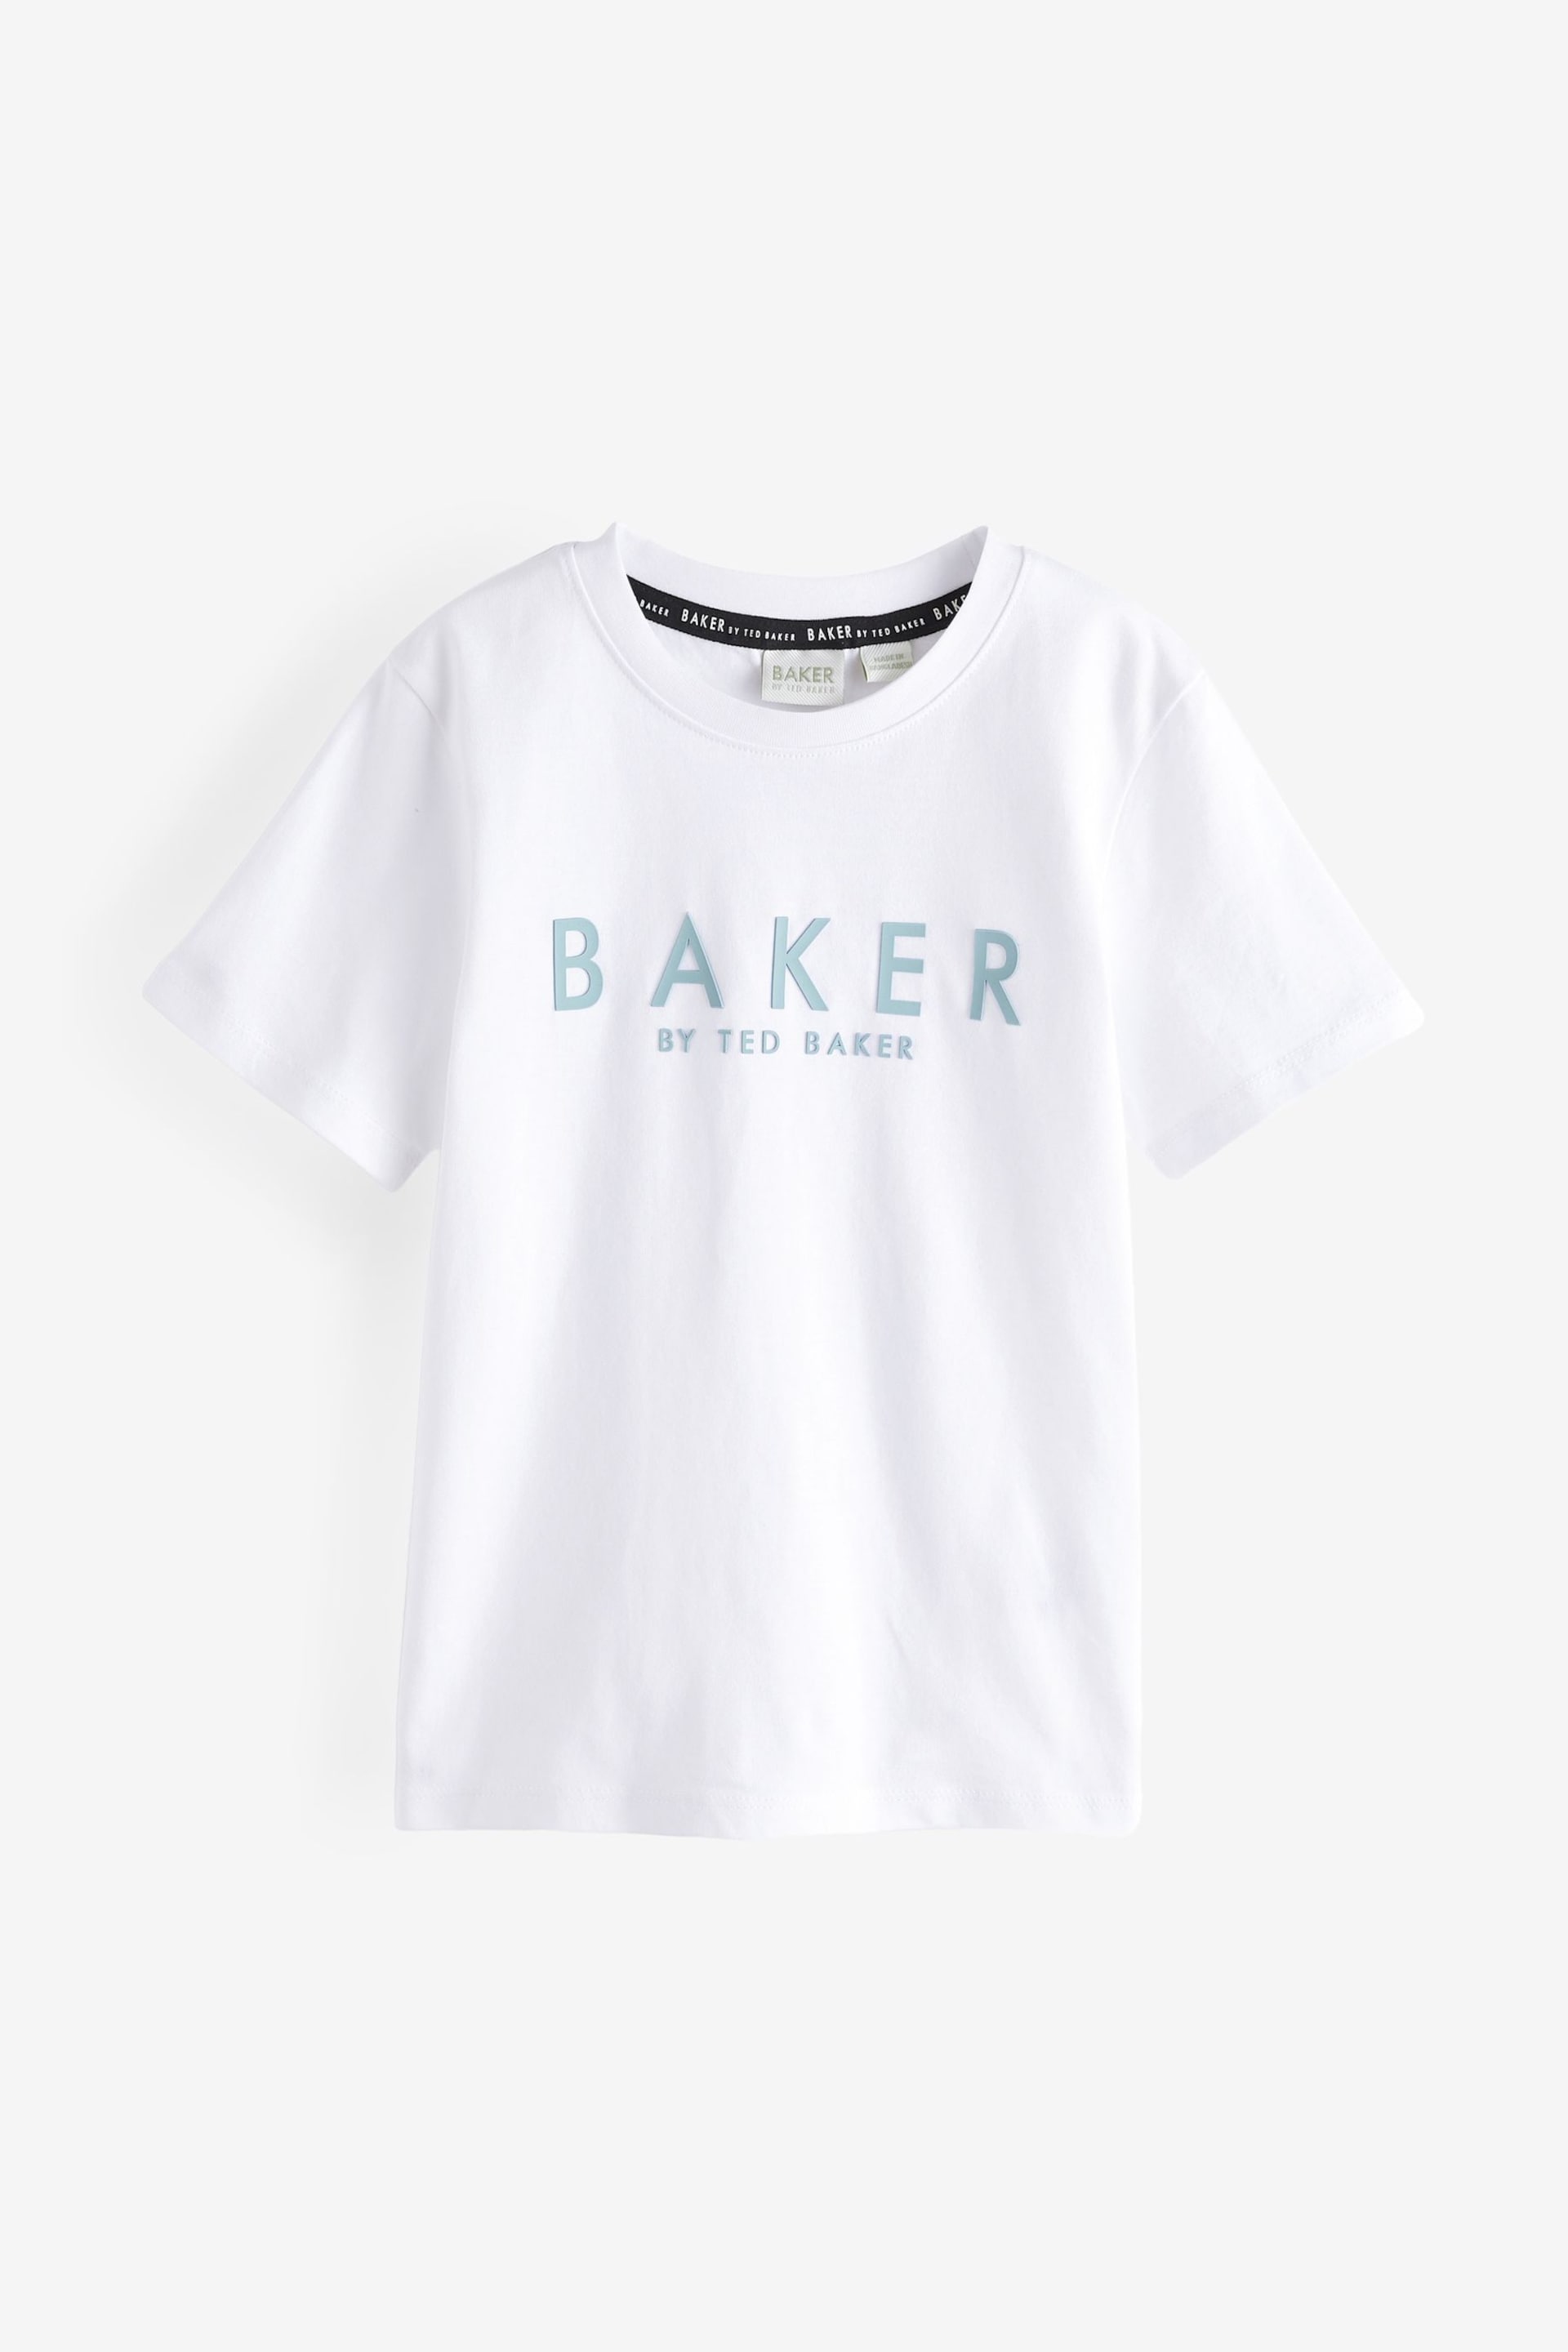 Baker by Ted Baker Blue T-Shirt and Shirt Set - Image 10 of 11